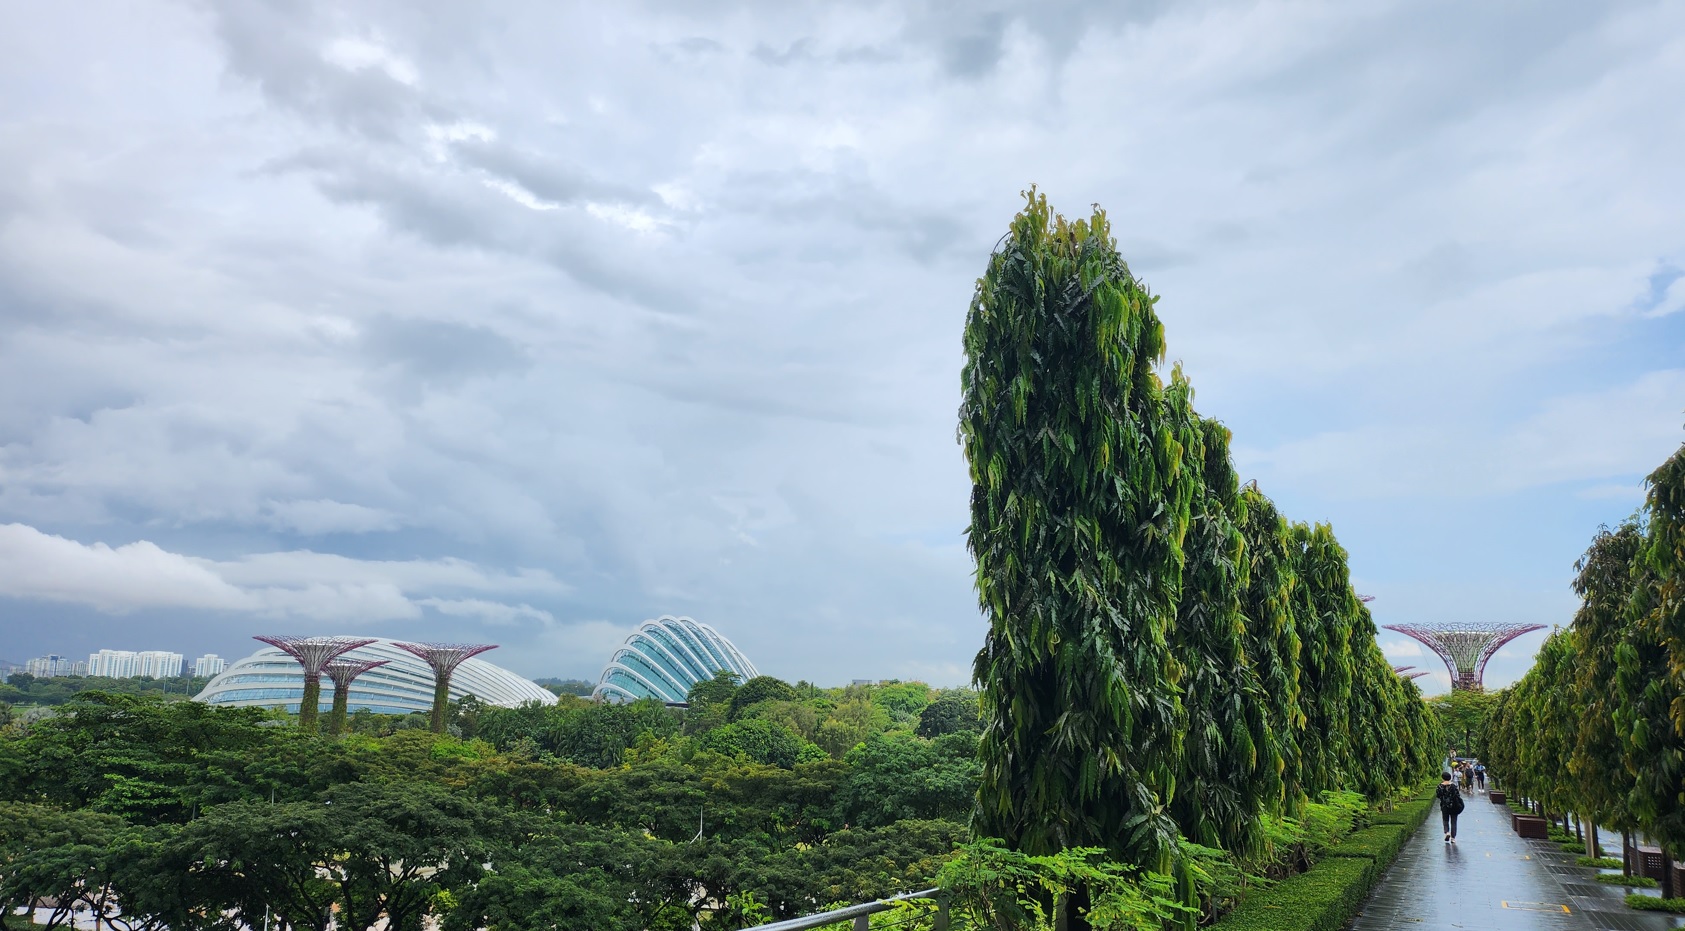 View of Gardens by the Bay